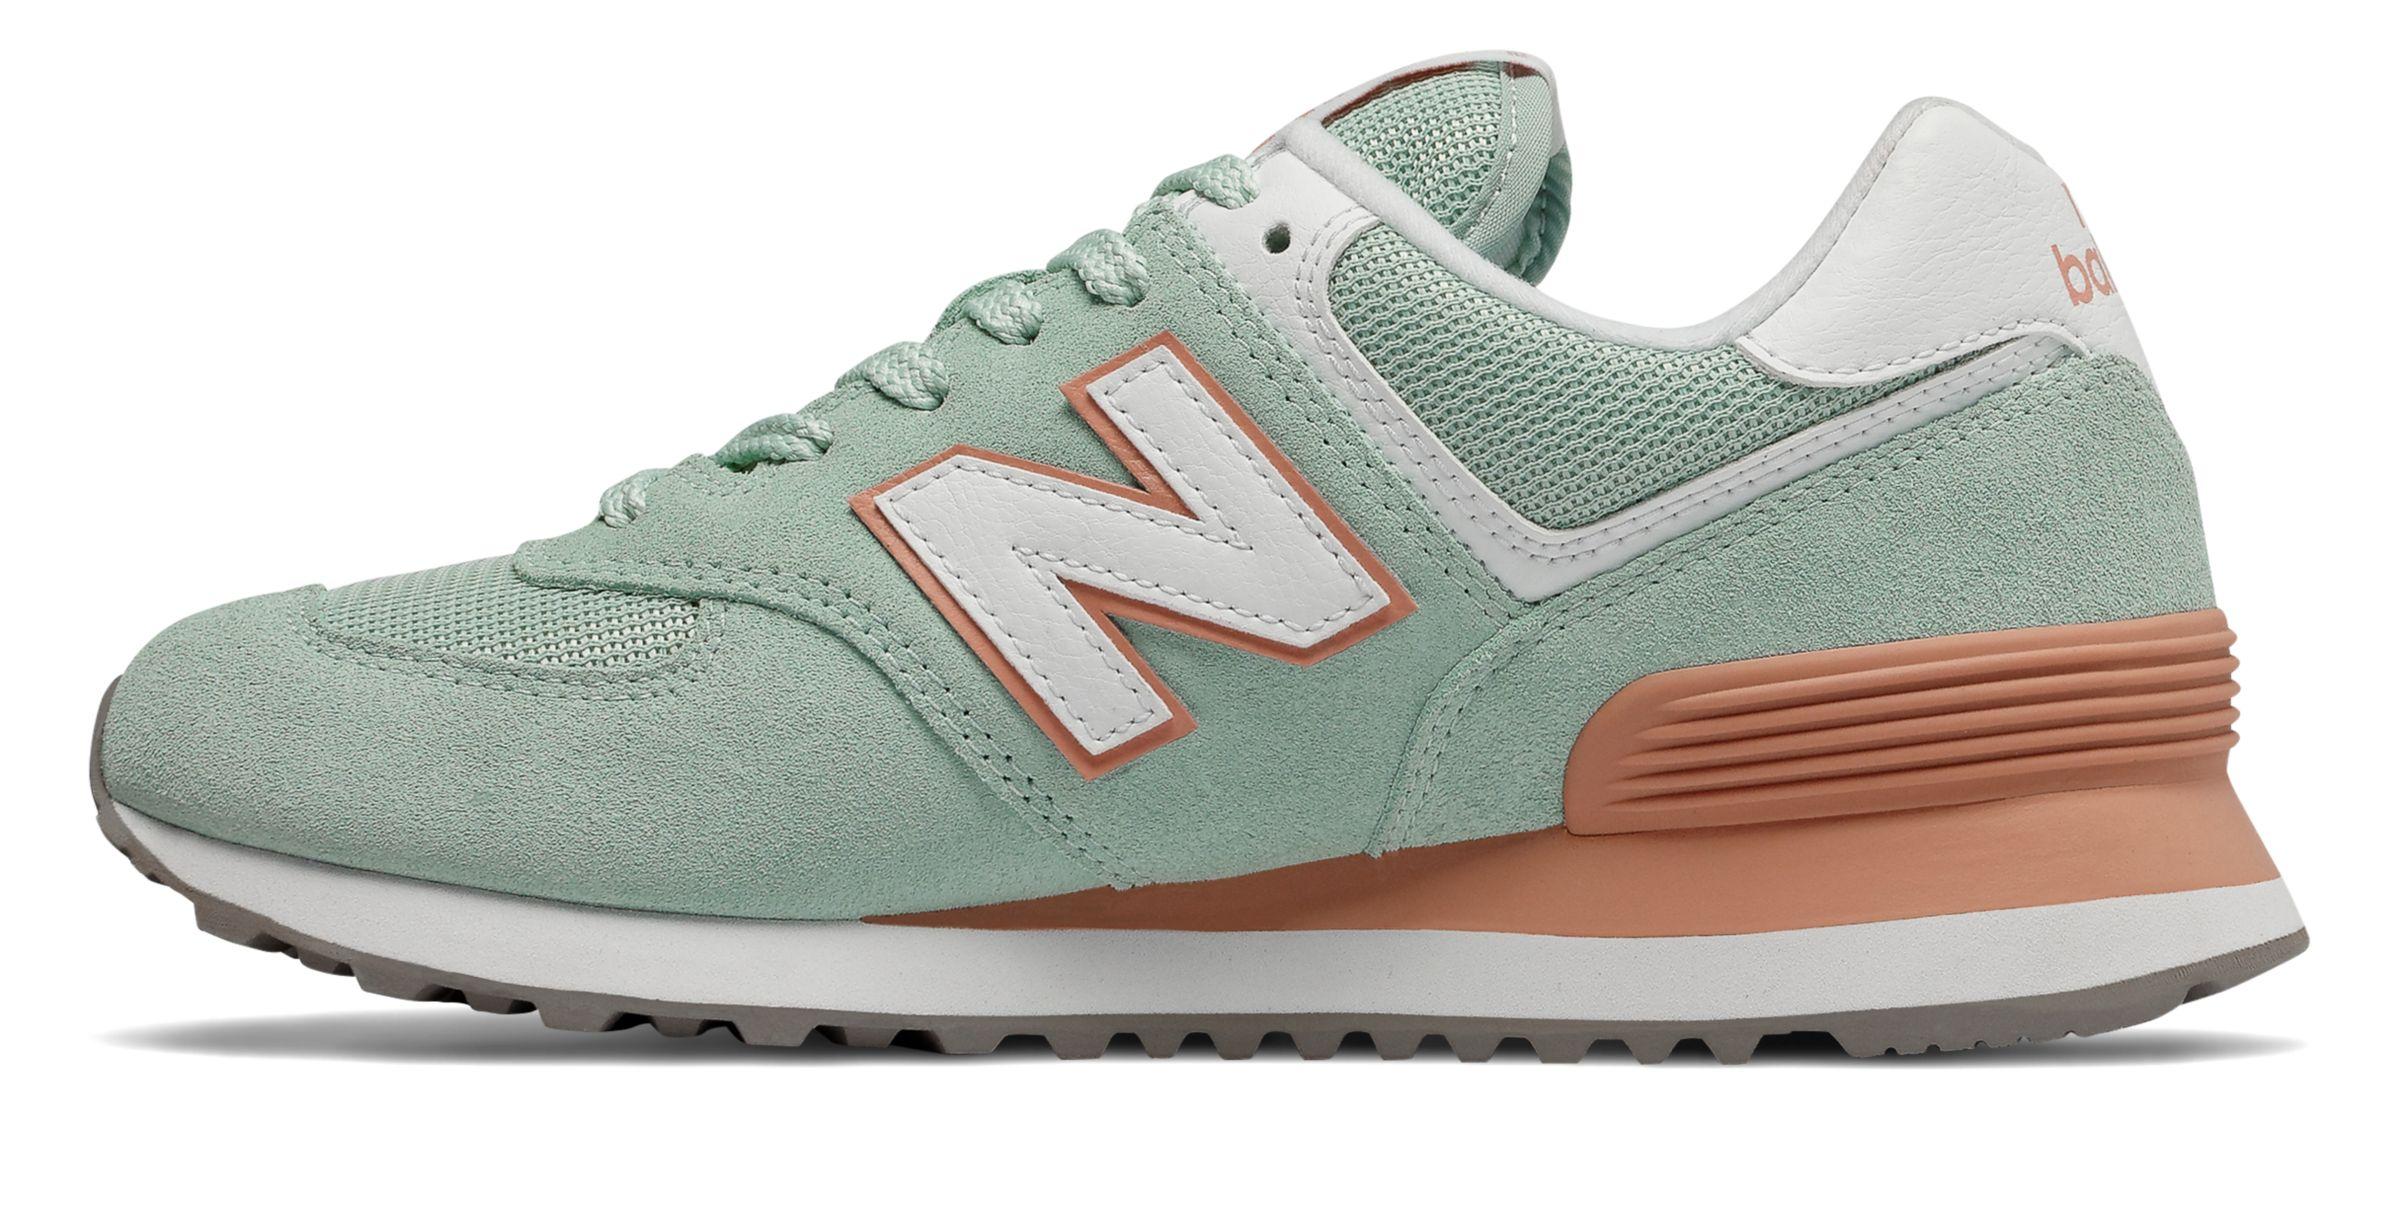 new balance 574 white agave, OFF 76%,Buy!